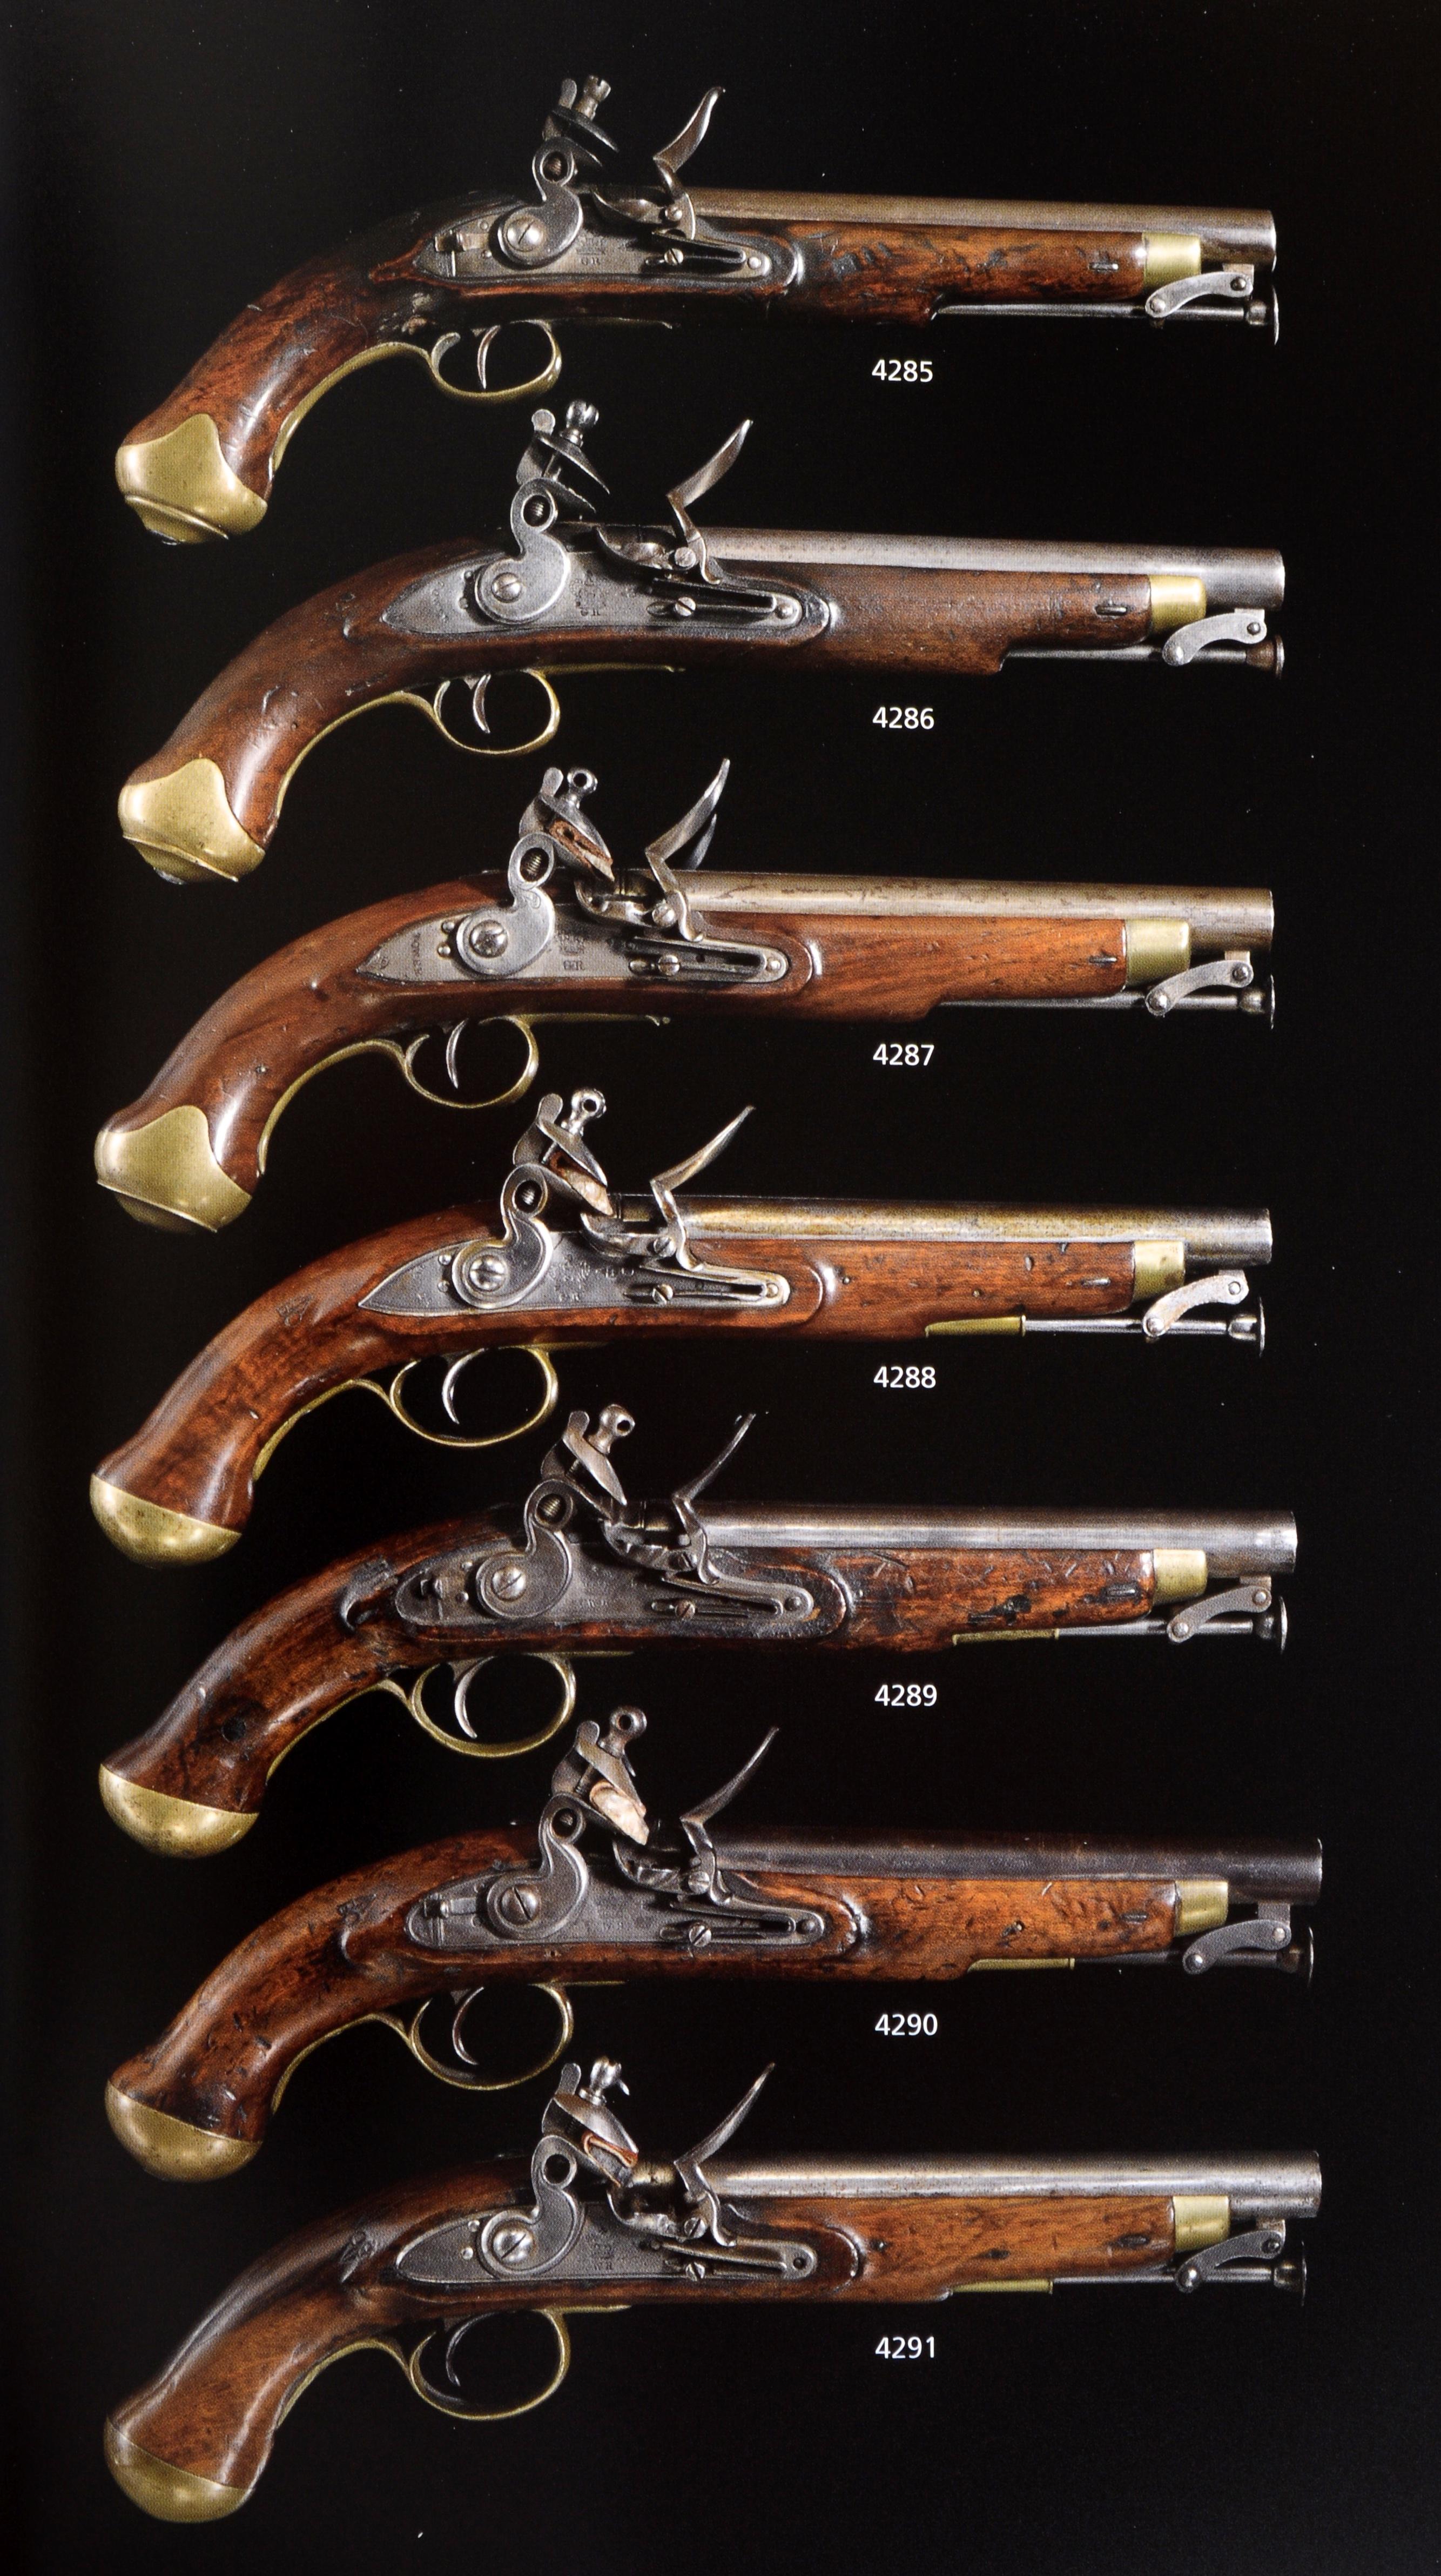 Bonhams 2013 Antique Arms & Armour Featured a Revolver Owned by Wild Bill Hickok For Sale 3